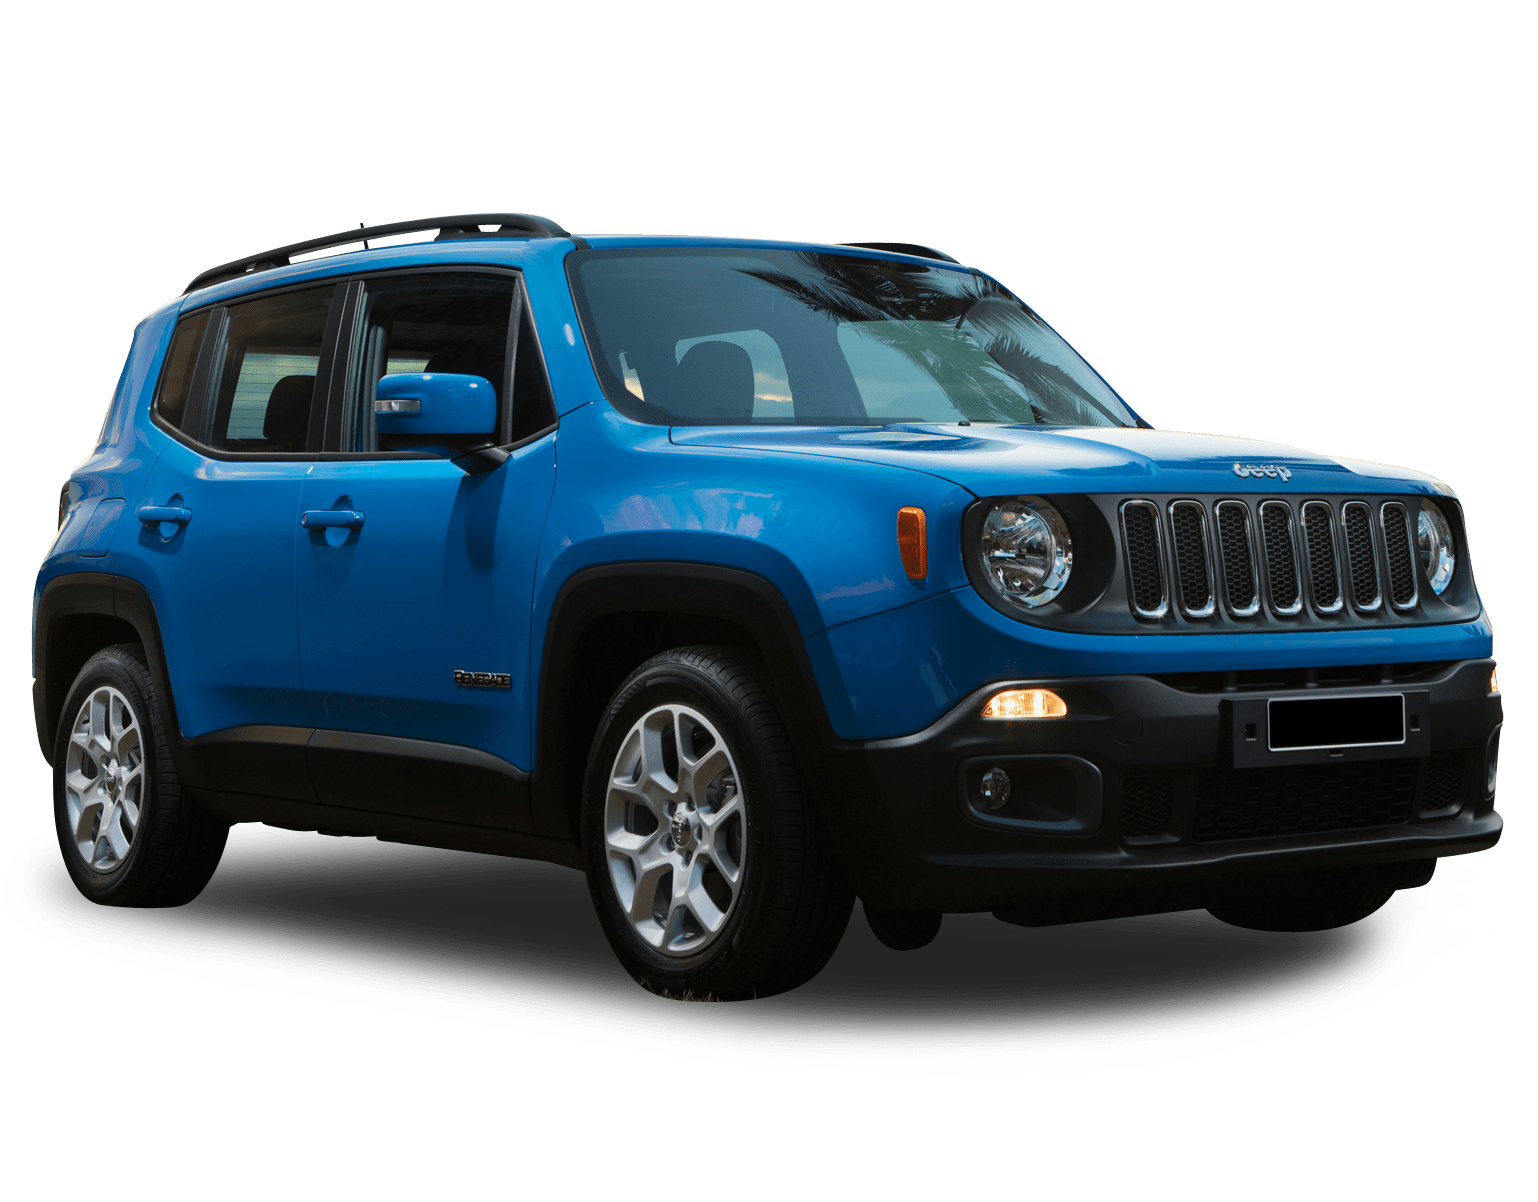 https://carsguide-res.cloudinary.com/image/upload/f_auto,fl_lossy,q_auto,t_default/v1/editorial/vhs/Jeep-Renegade_0.png